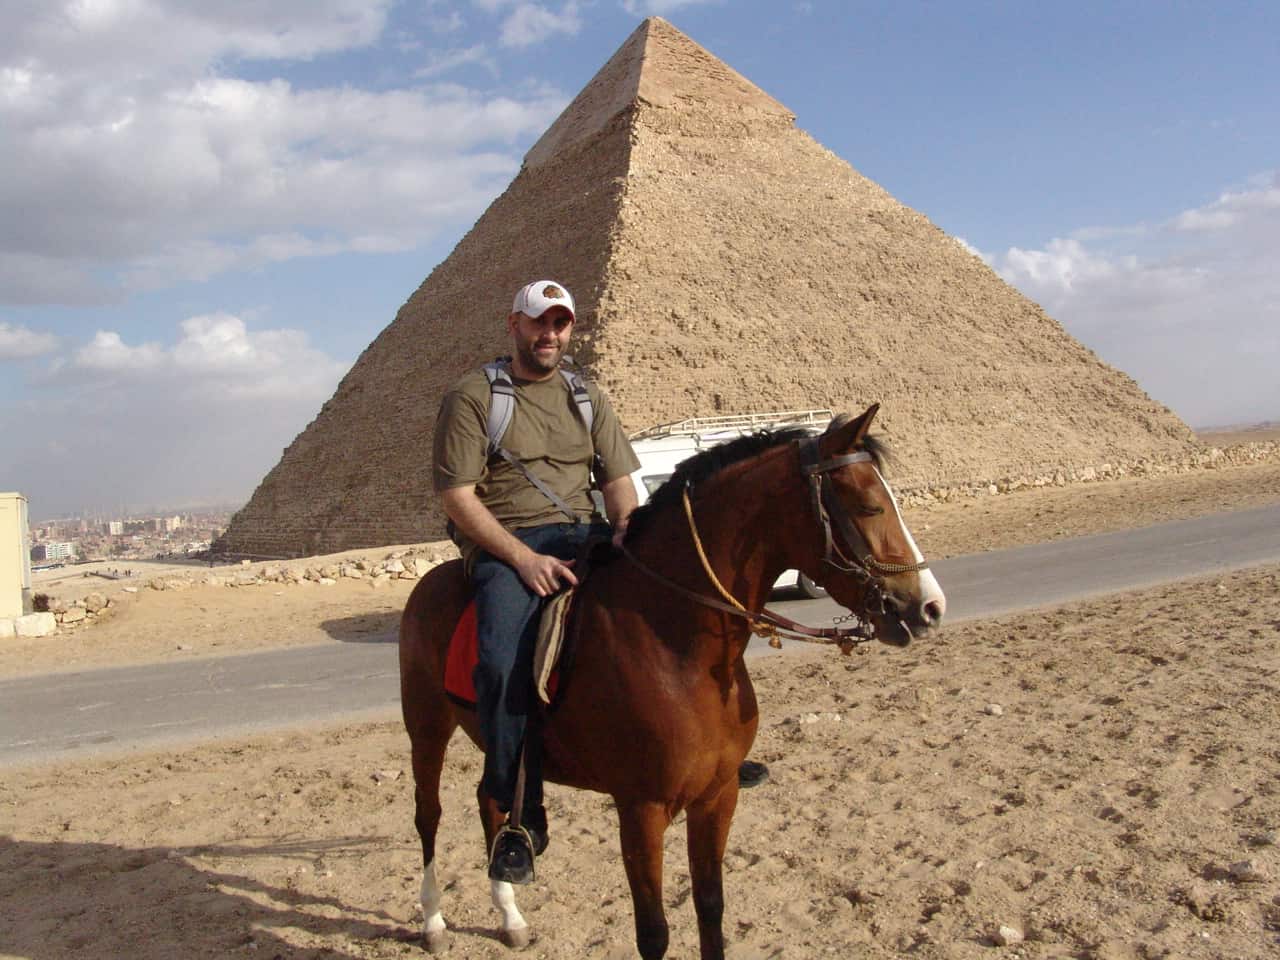 On horseback at the Pyramids of Giza in Egypt